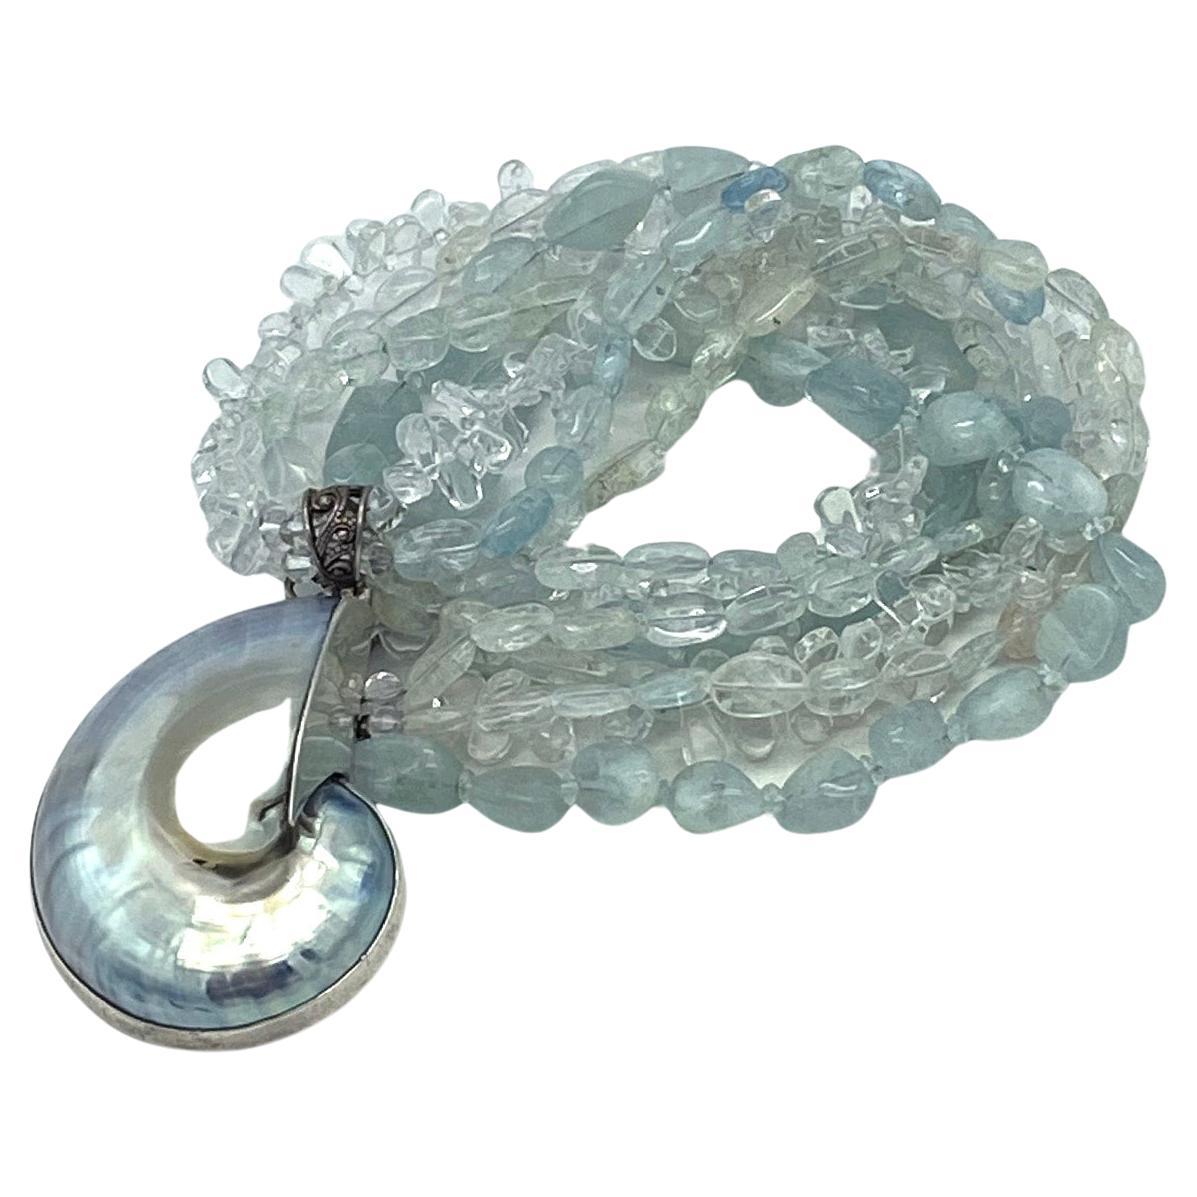 This is a multi-strand aquamarine (with a mixture of transparent to opaque stones) necklace with an ammonoidea (1.63 x 2.25 x 0.75 inch) pendant in sterling silver frame and with a toggle clasp. 

Our vintage jewelry collection and original